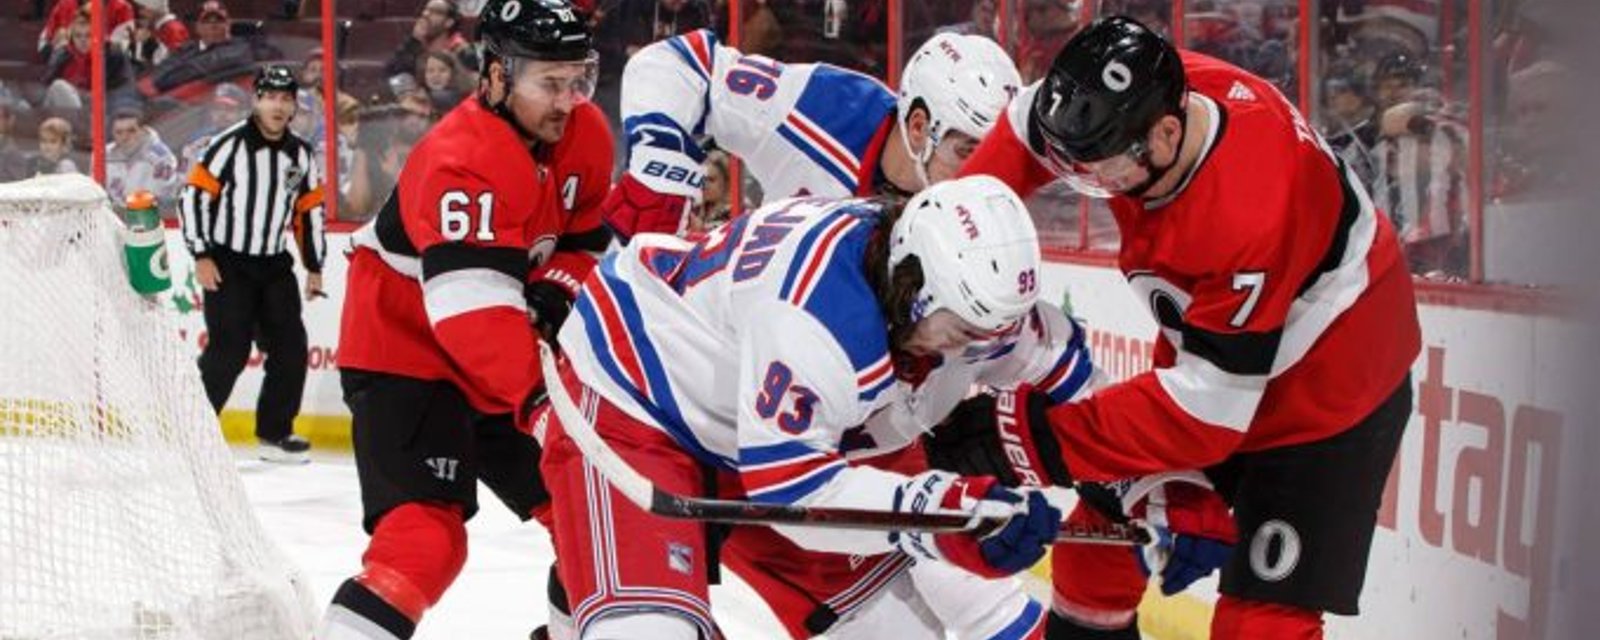 Rangers made ridiculous line adjustments during the game and fans got so confused! 